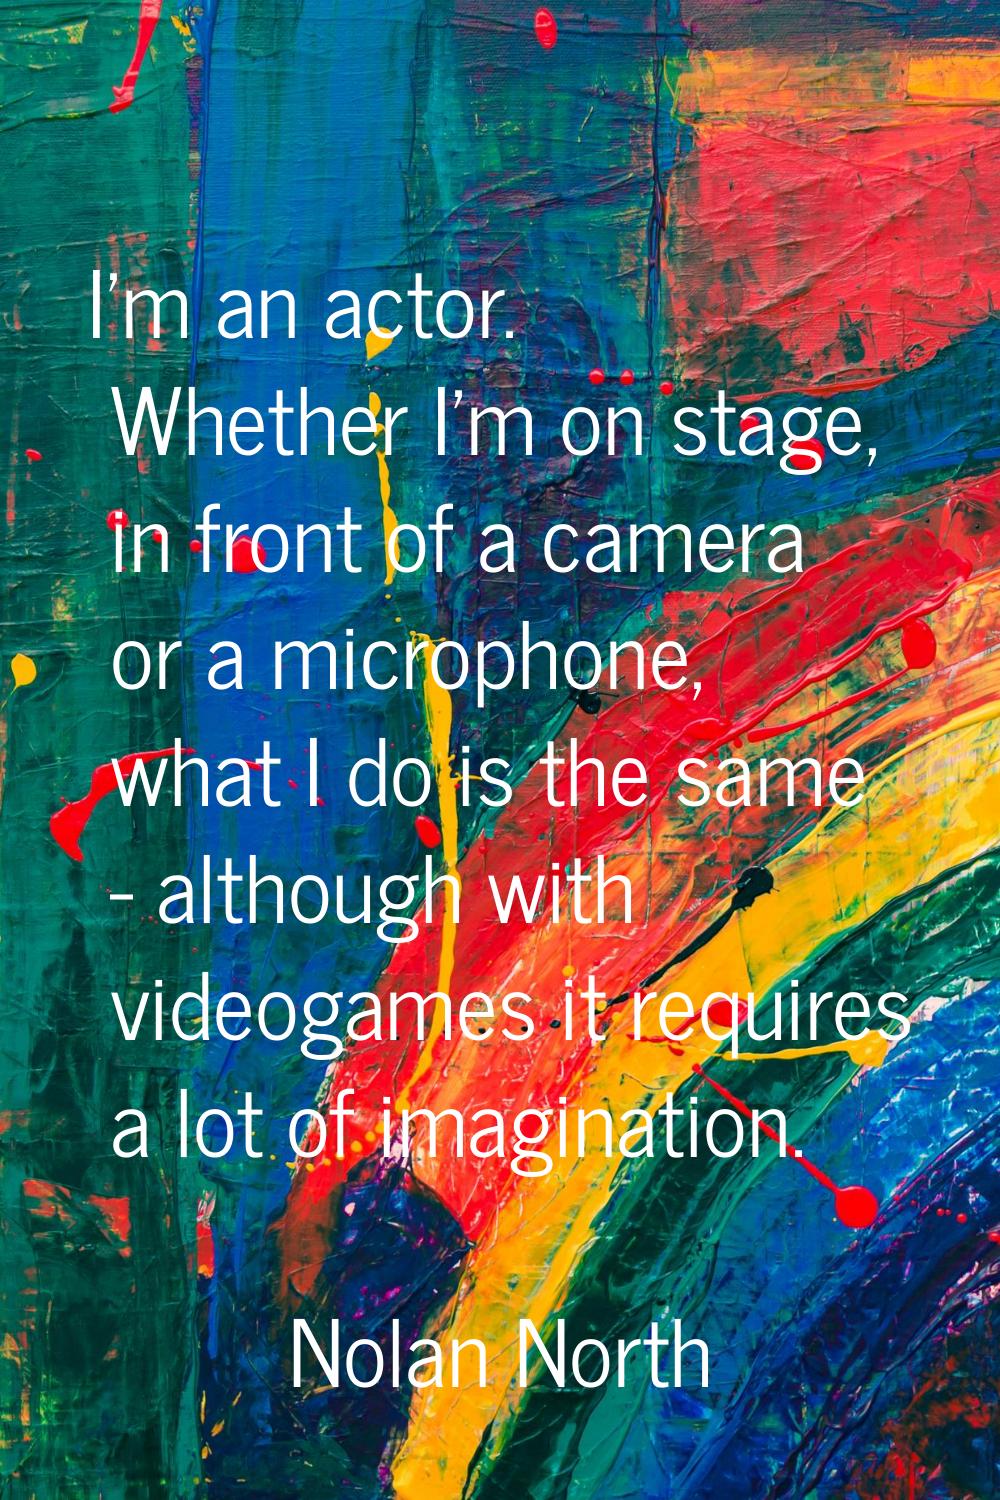 I'm an actor. Whether I'm on stage, in front of a camera or a microphone, what I do is the same - a